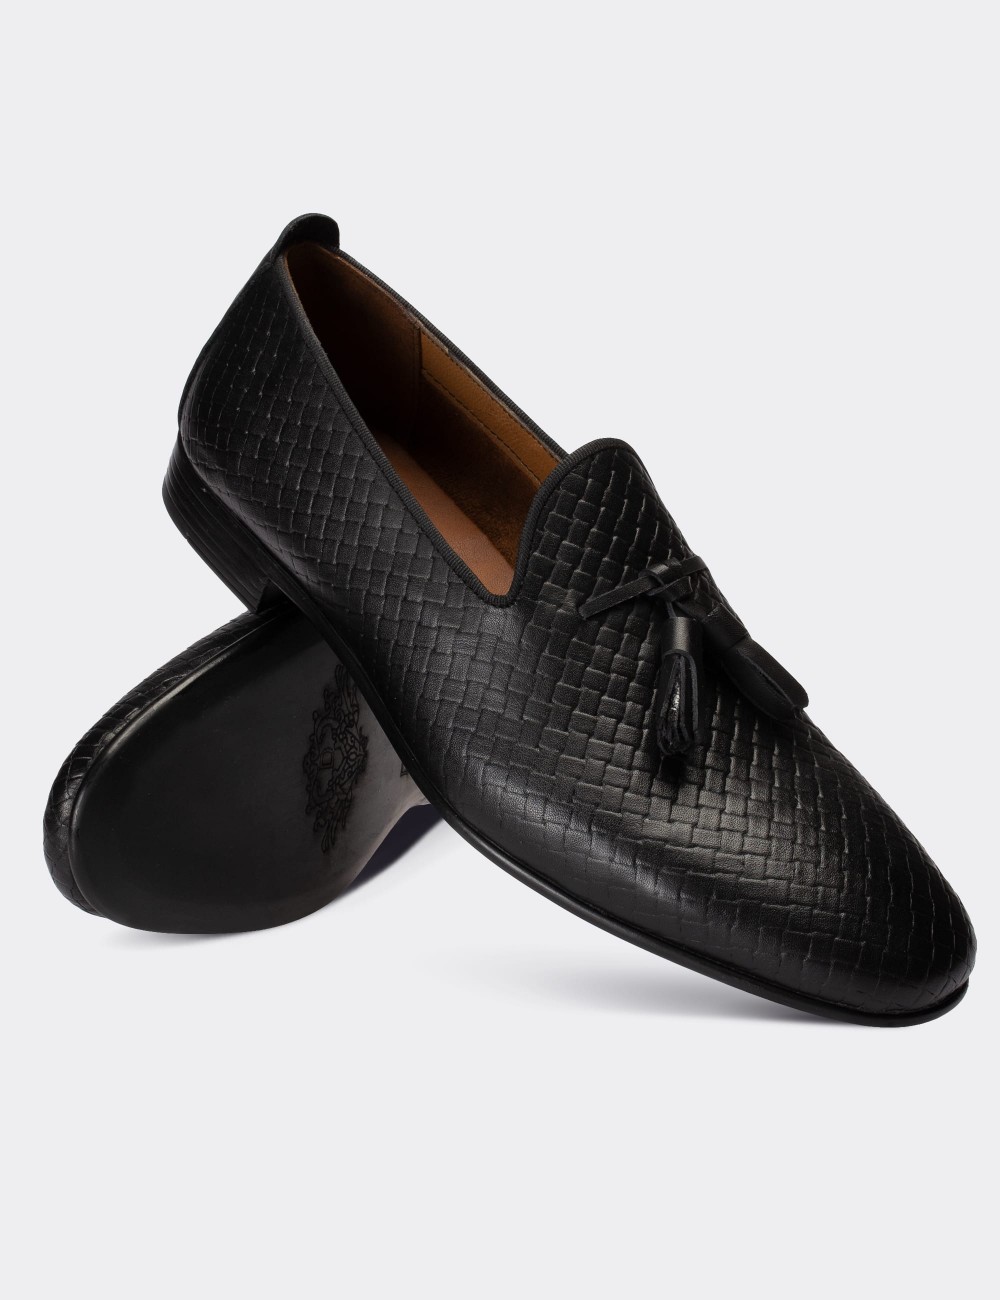 Black  Leather Loafers - 01702MSYHC06